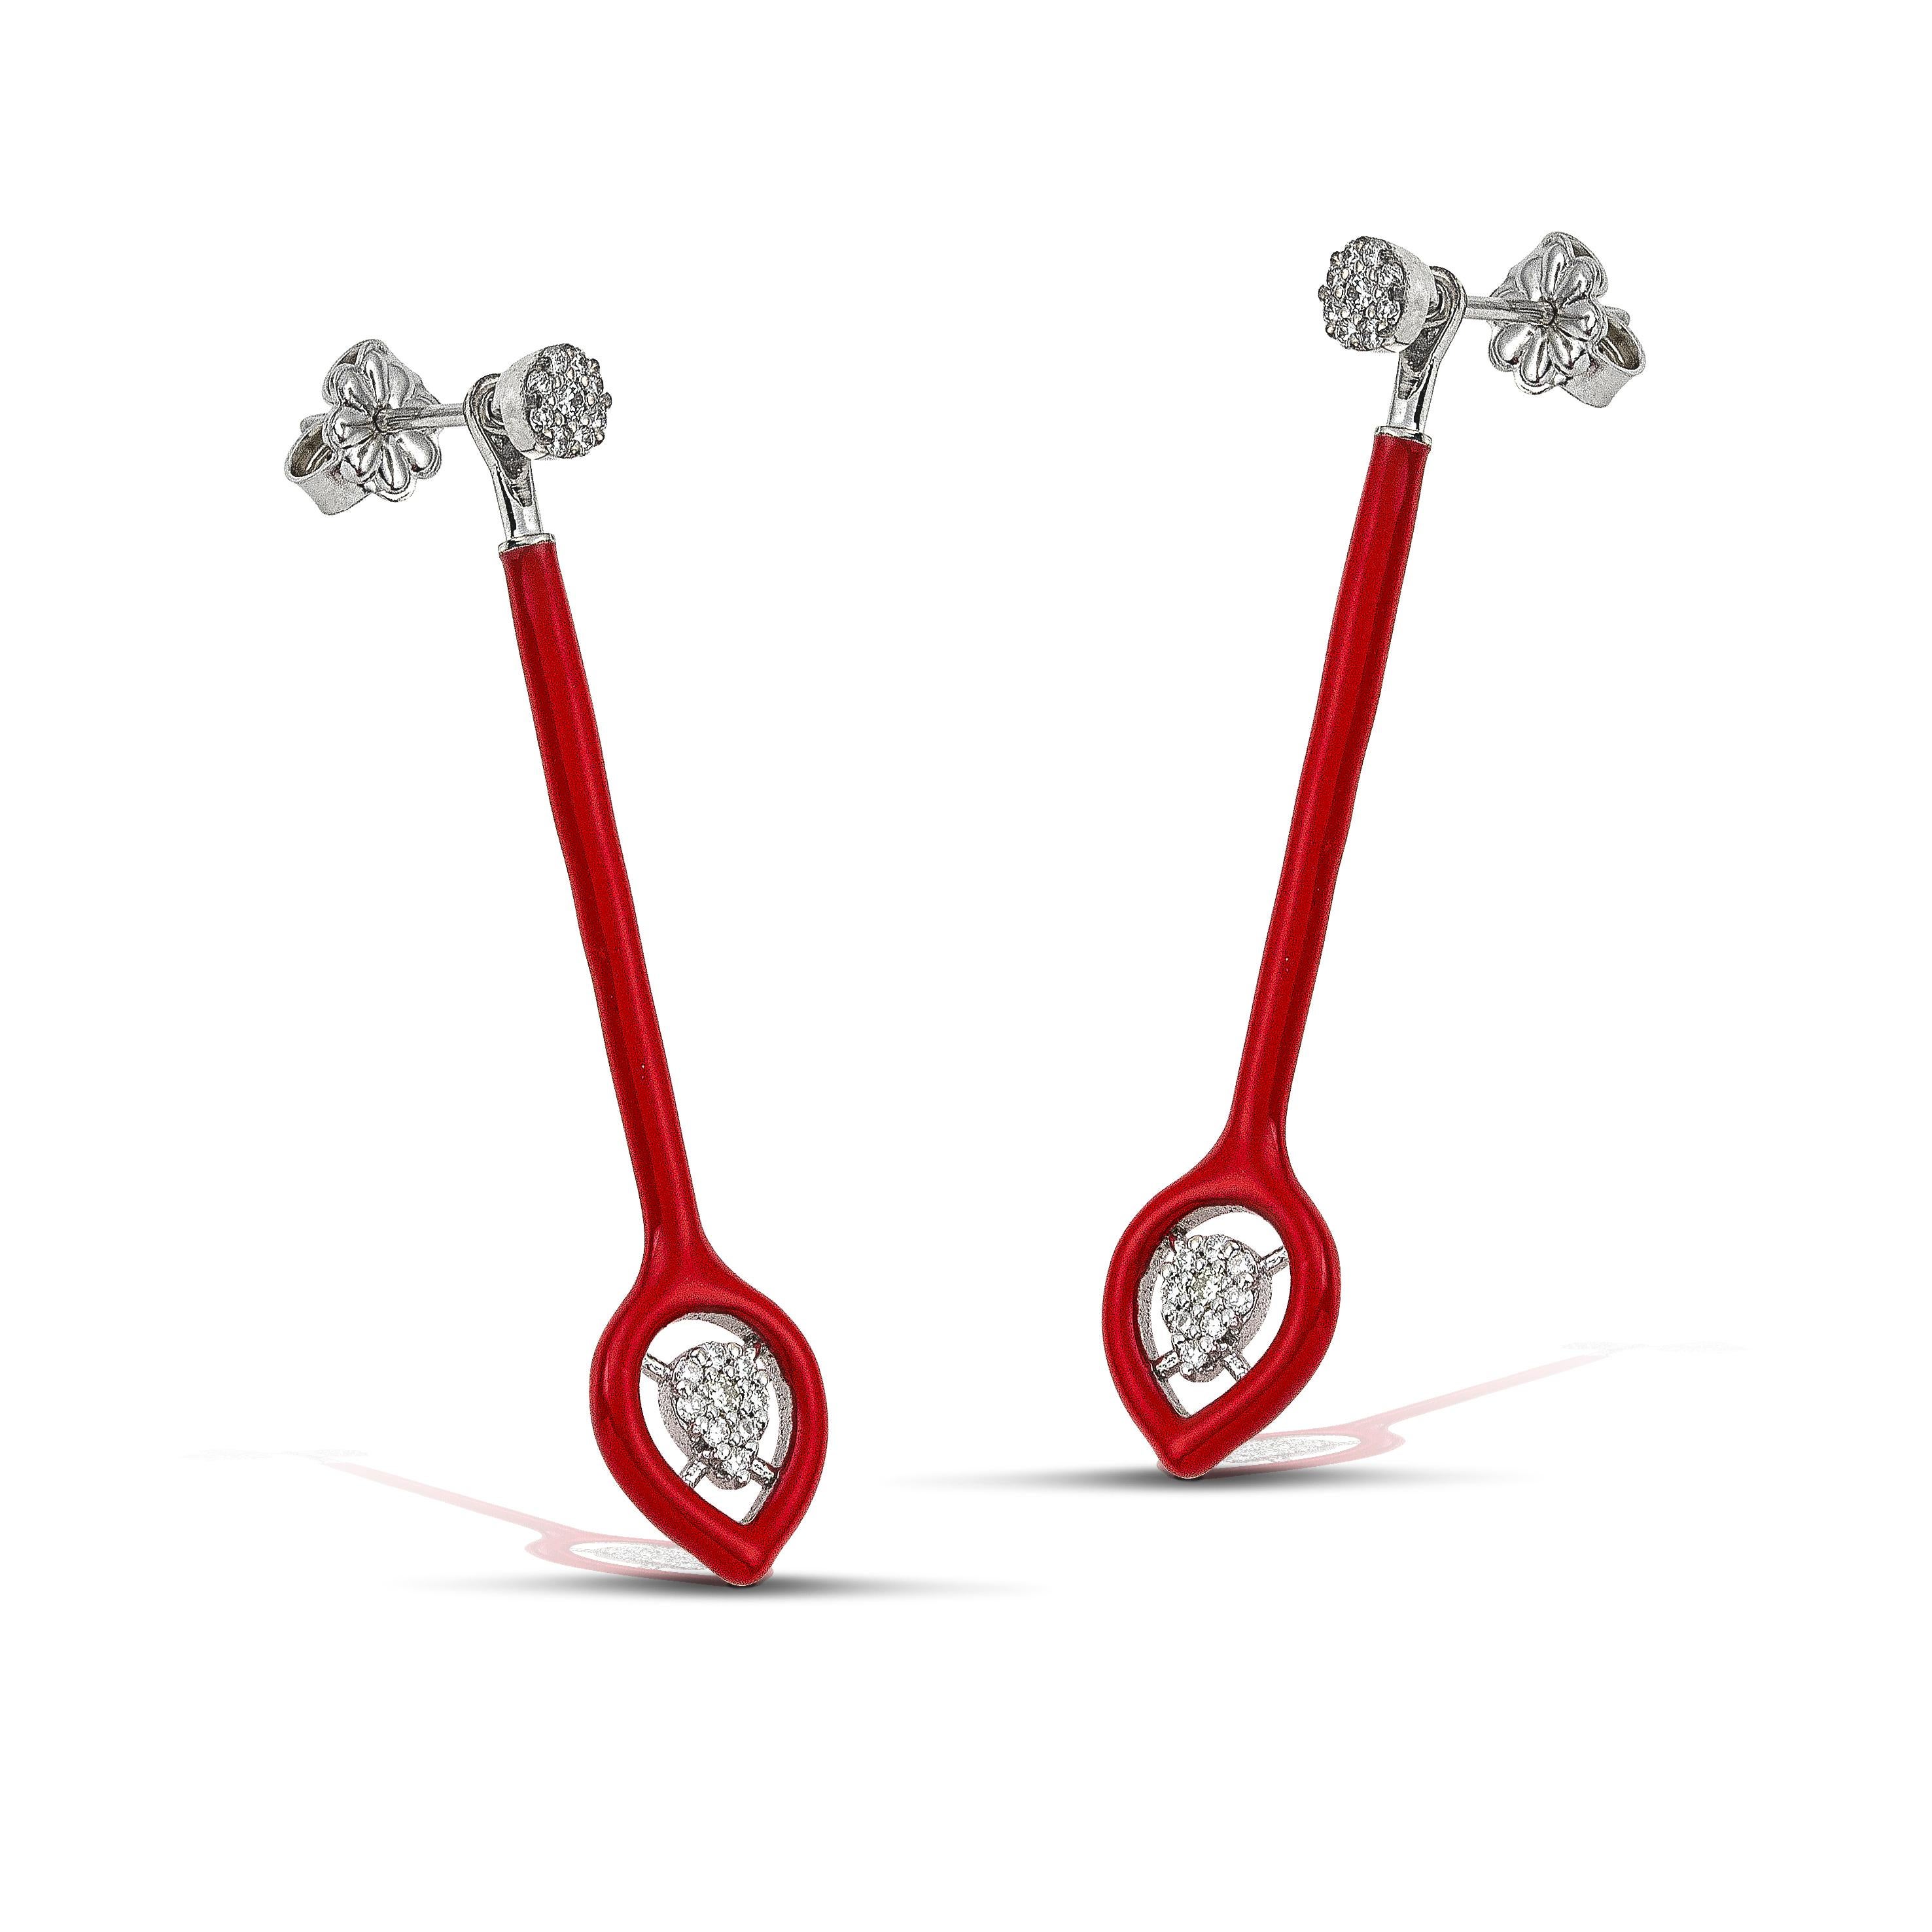 14K gold diamond earrings with an indiscreet flashy red colour accent, the perfect gift for yourself or a loved one.
100% Recycled 14 K White Gold
Diamonds
Red Enamel
Two in one: The long part of the earring is Removable- Detachable, allowing a